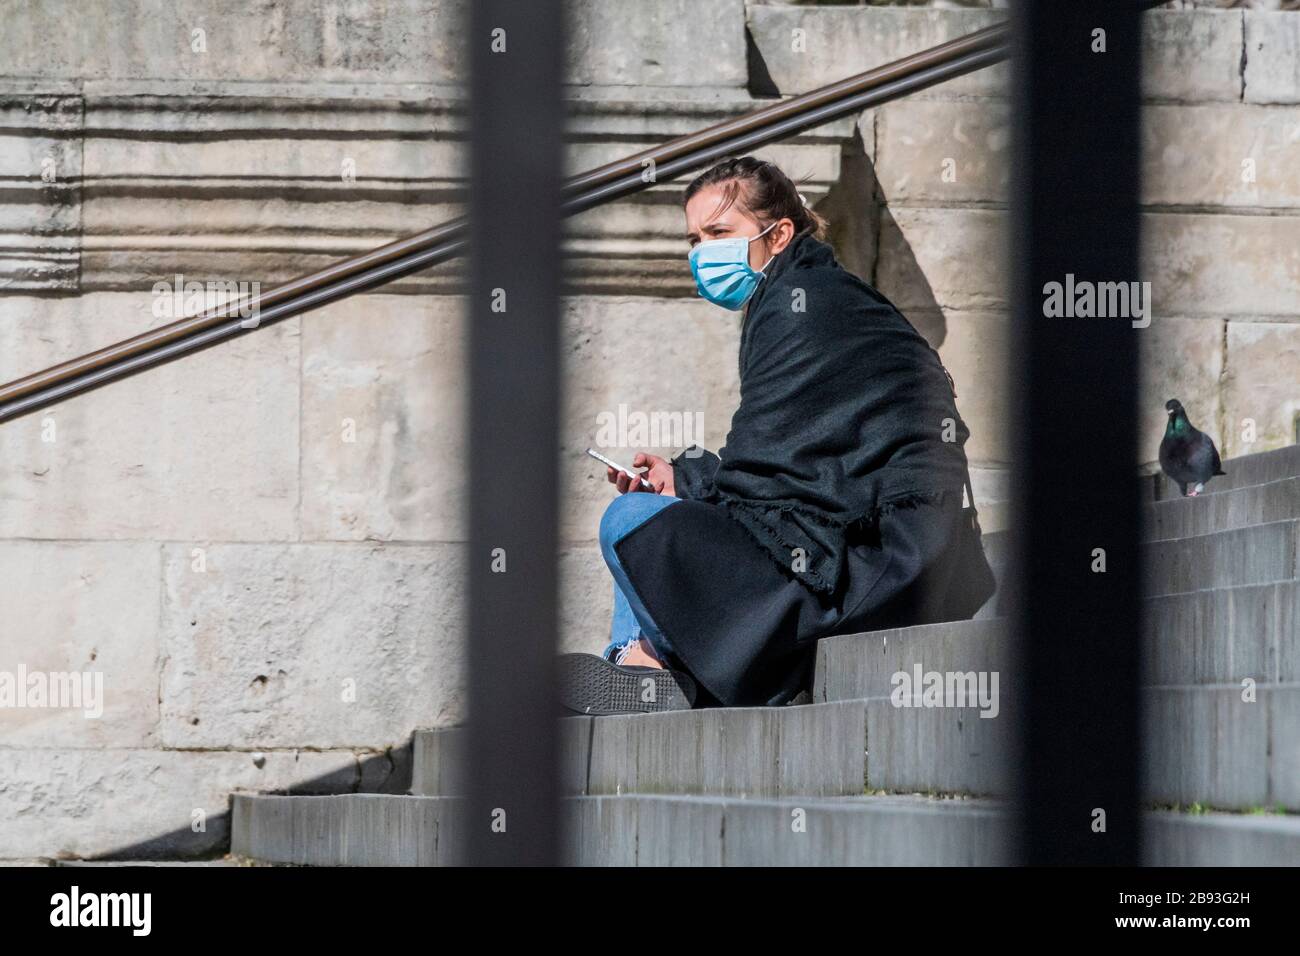 London, UK. 23rd Mar 2020. No Lock down as yet - St Paul's Cathedral is closed but a few people still enjoy the sun on the steps - Anti Coronavirus (Covid 19) outbreak in London. Credit: Guy Bell/Alamy Live News Stock Photo